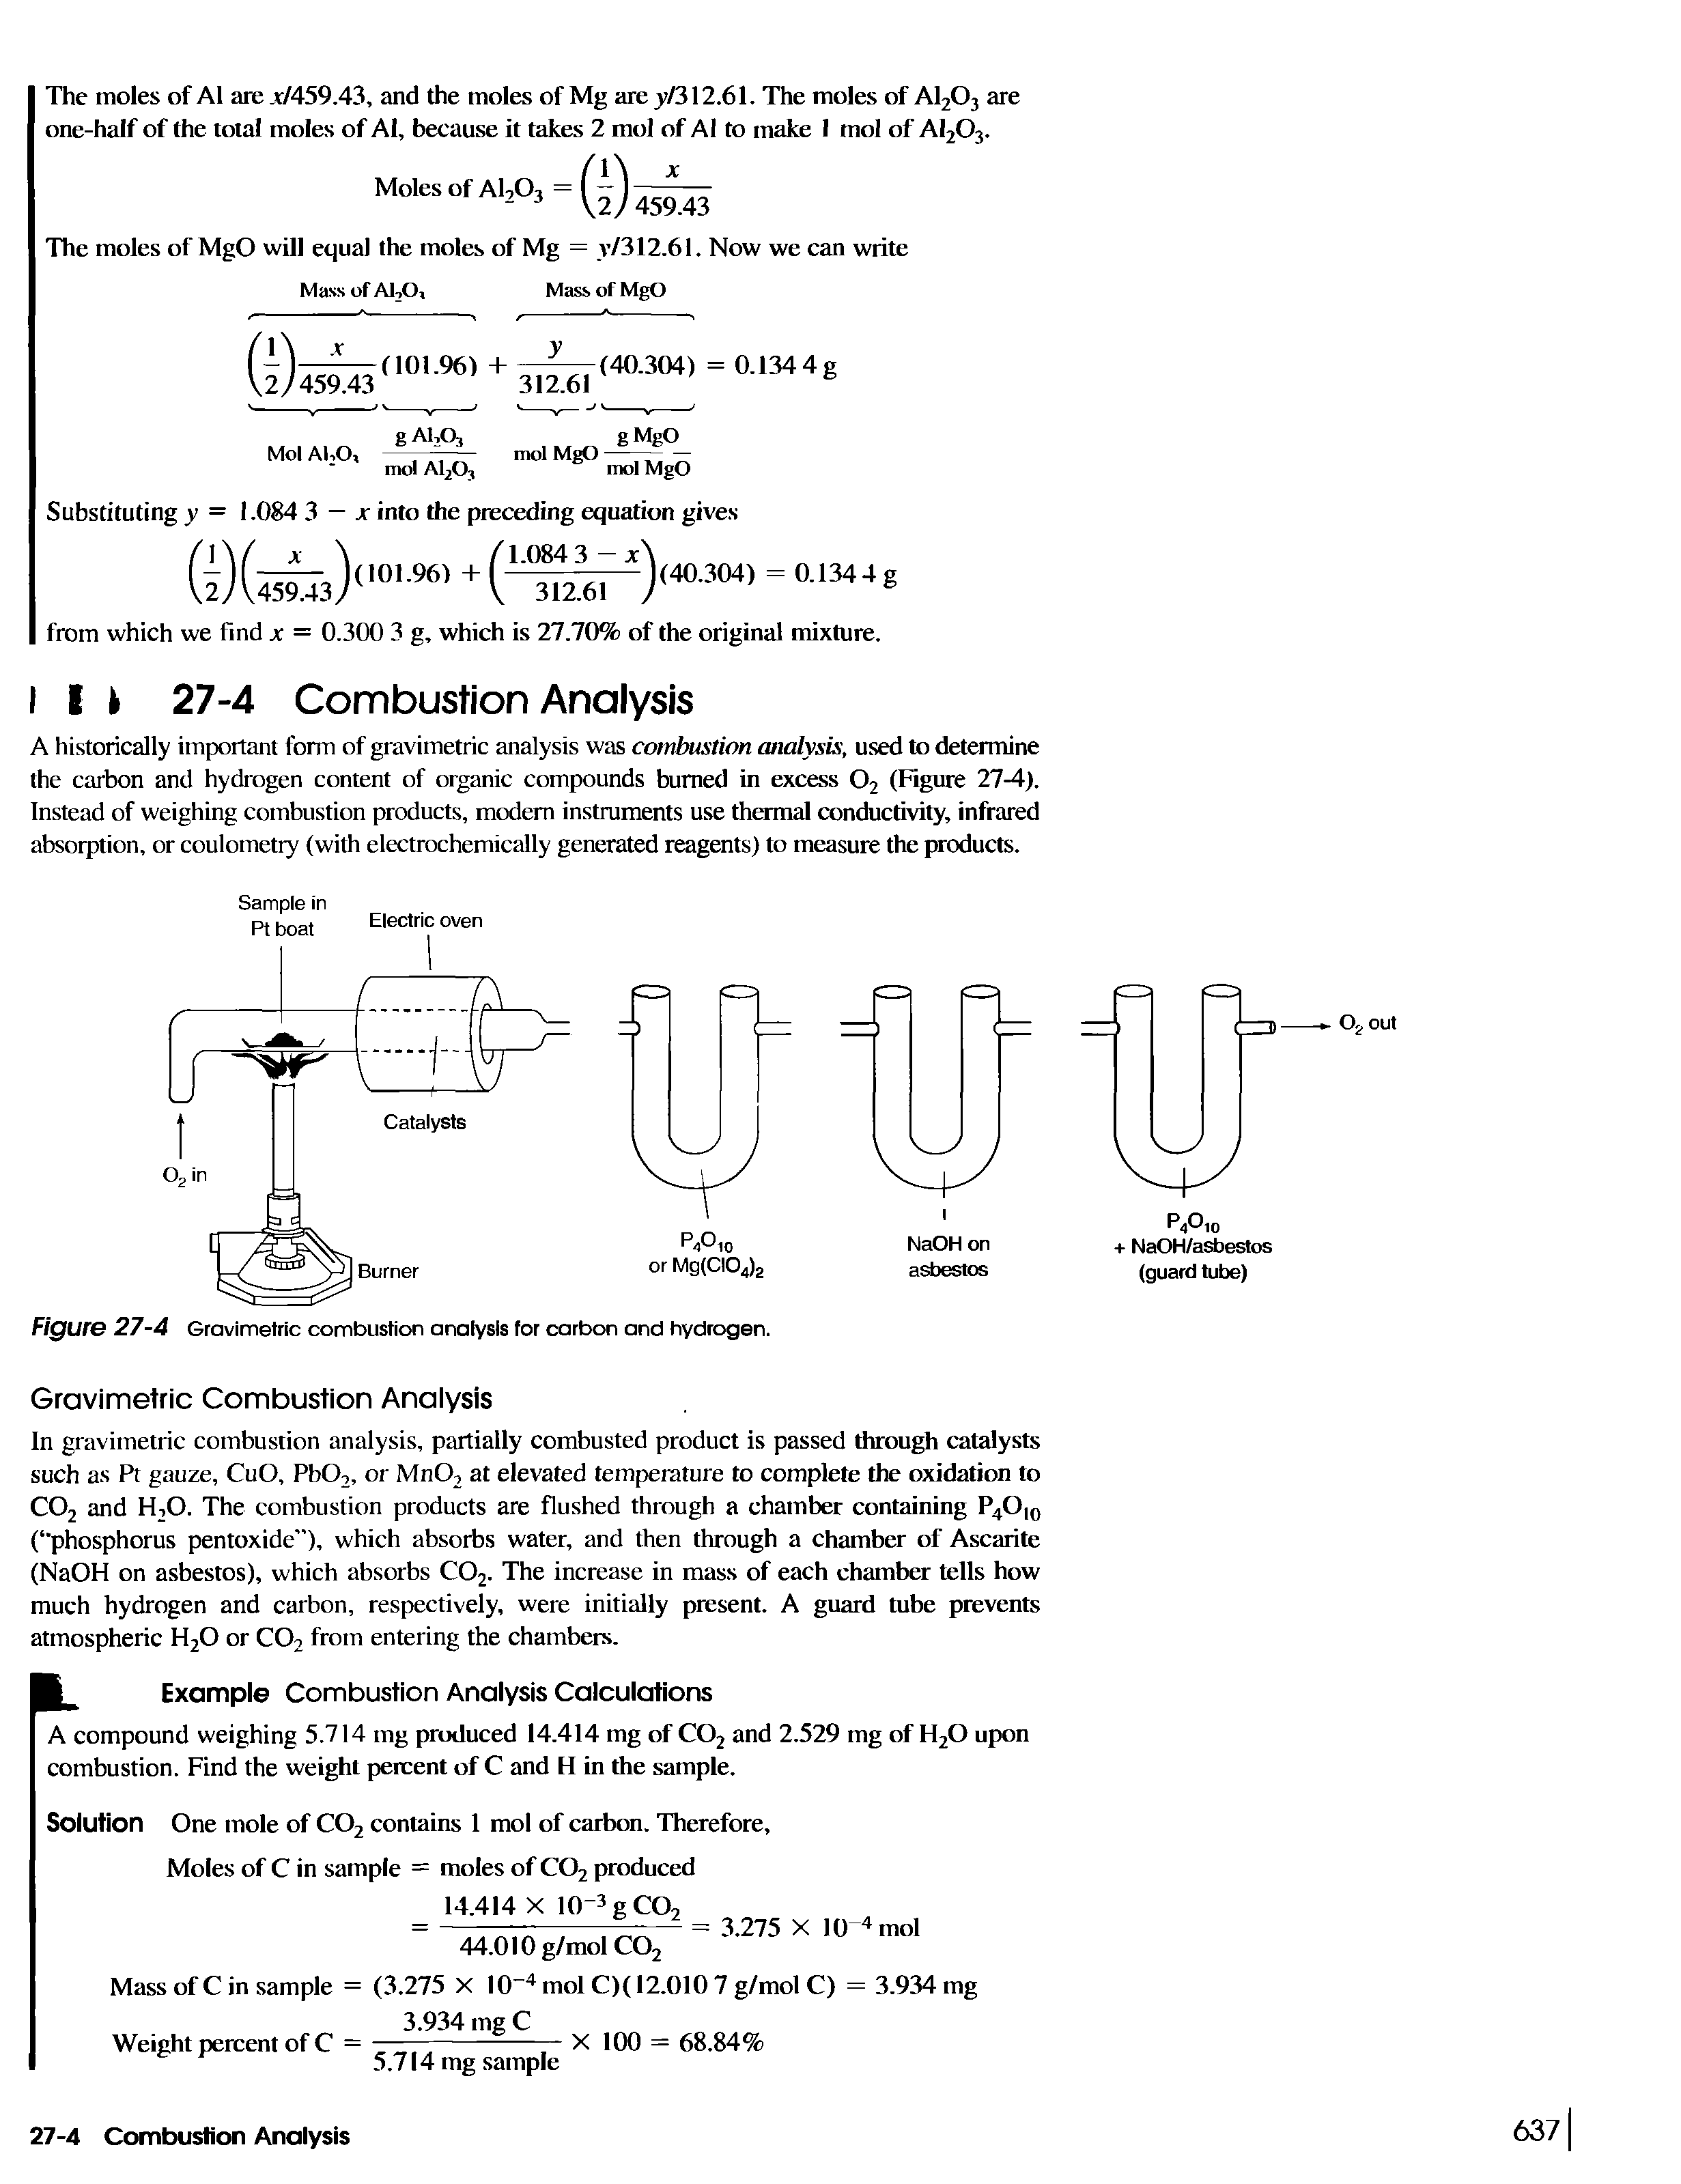 Figure 27-4 Gravimetric combustion analysis for carbon and hydrogen.